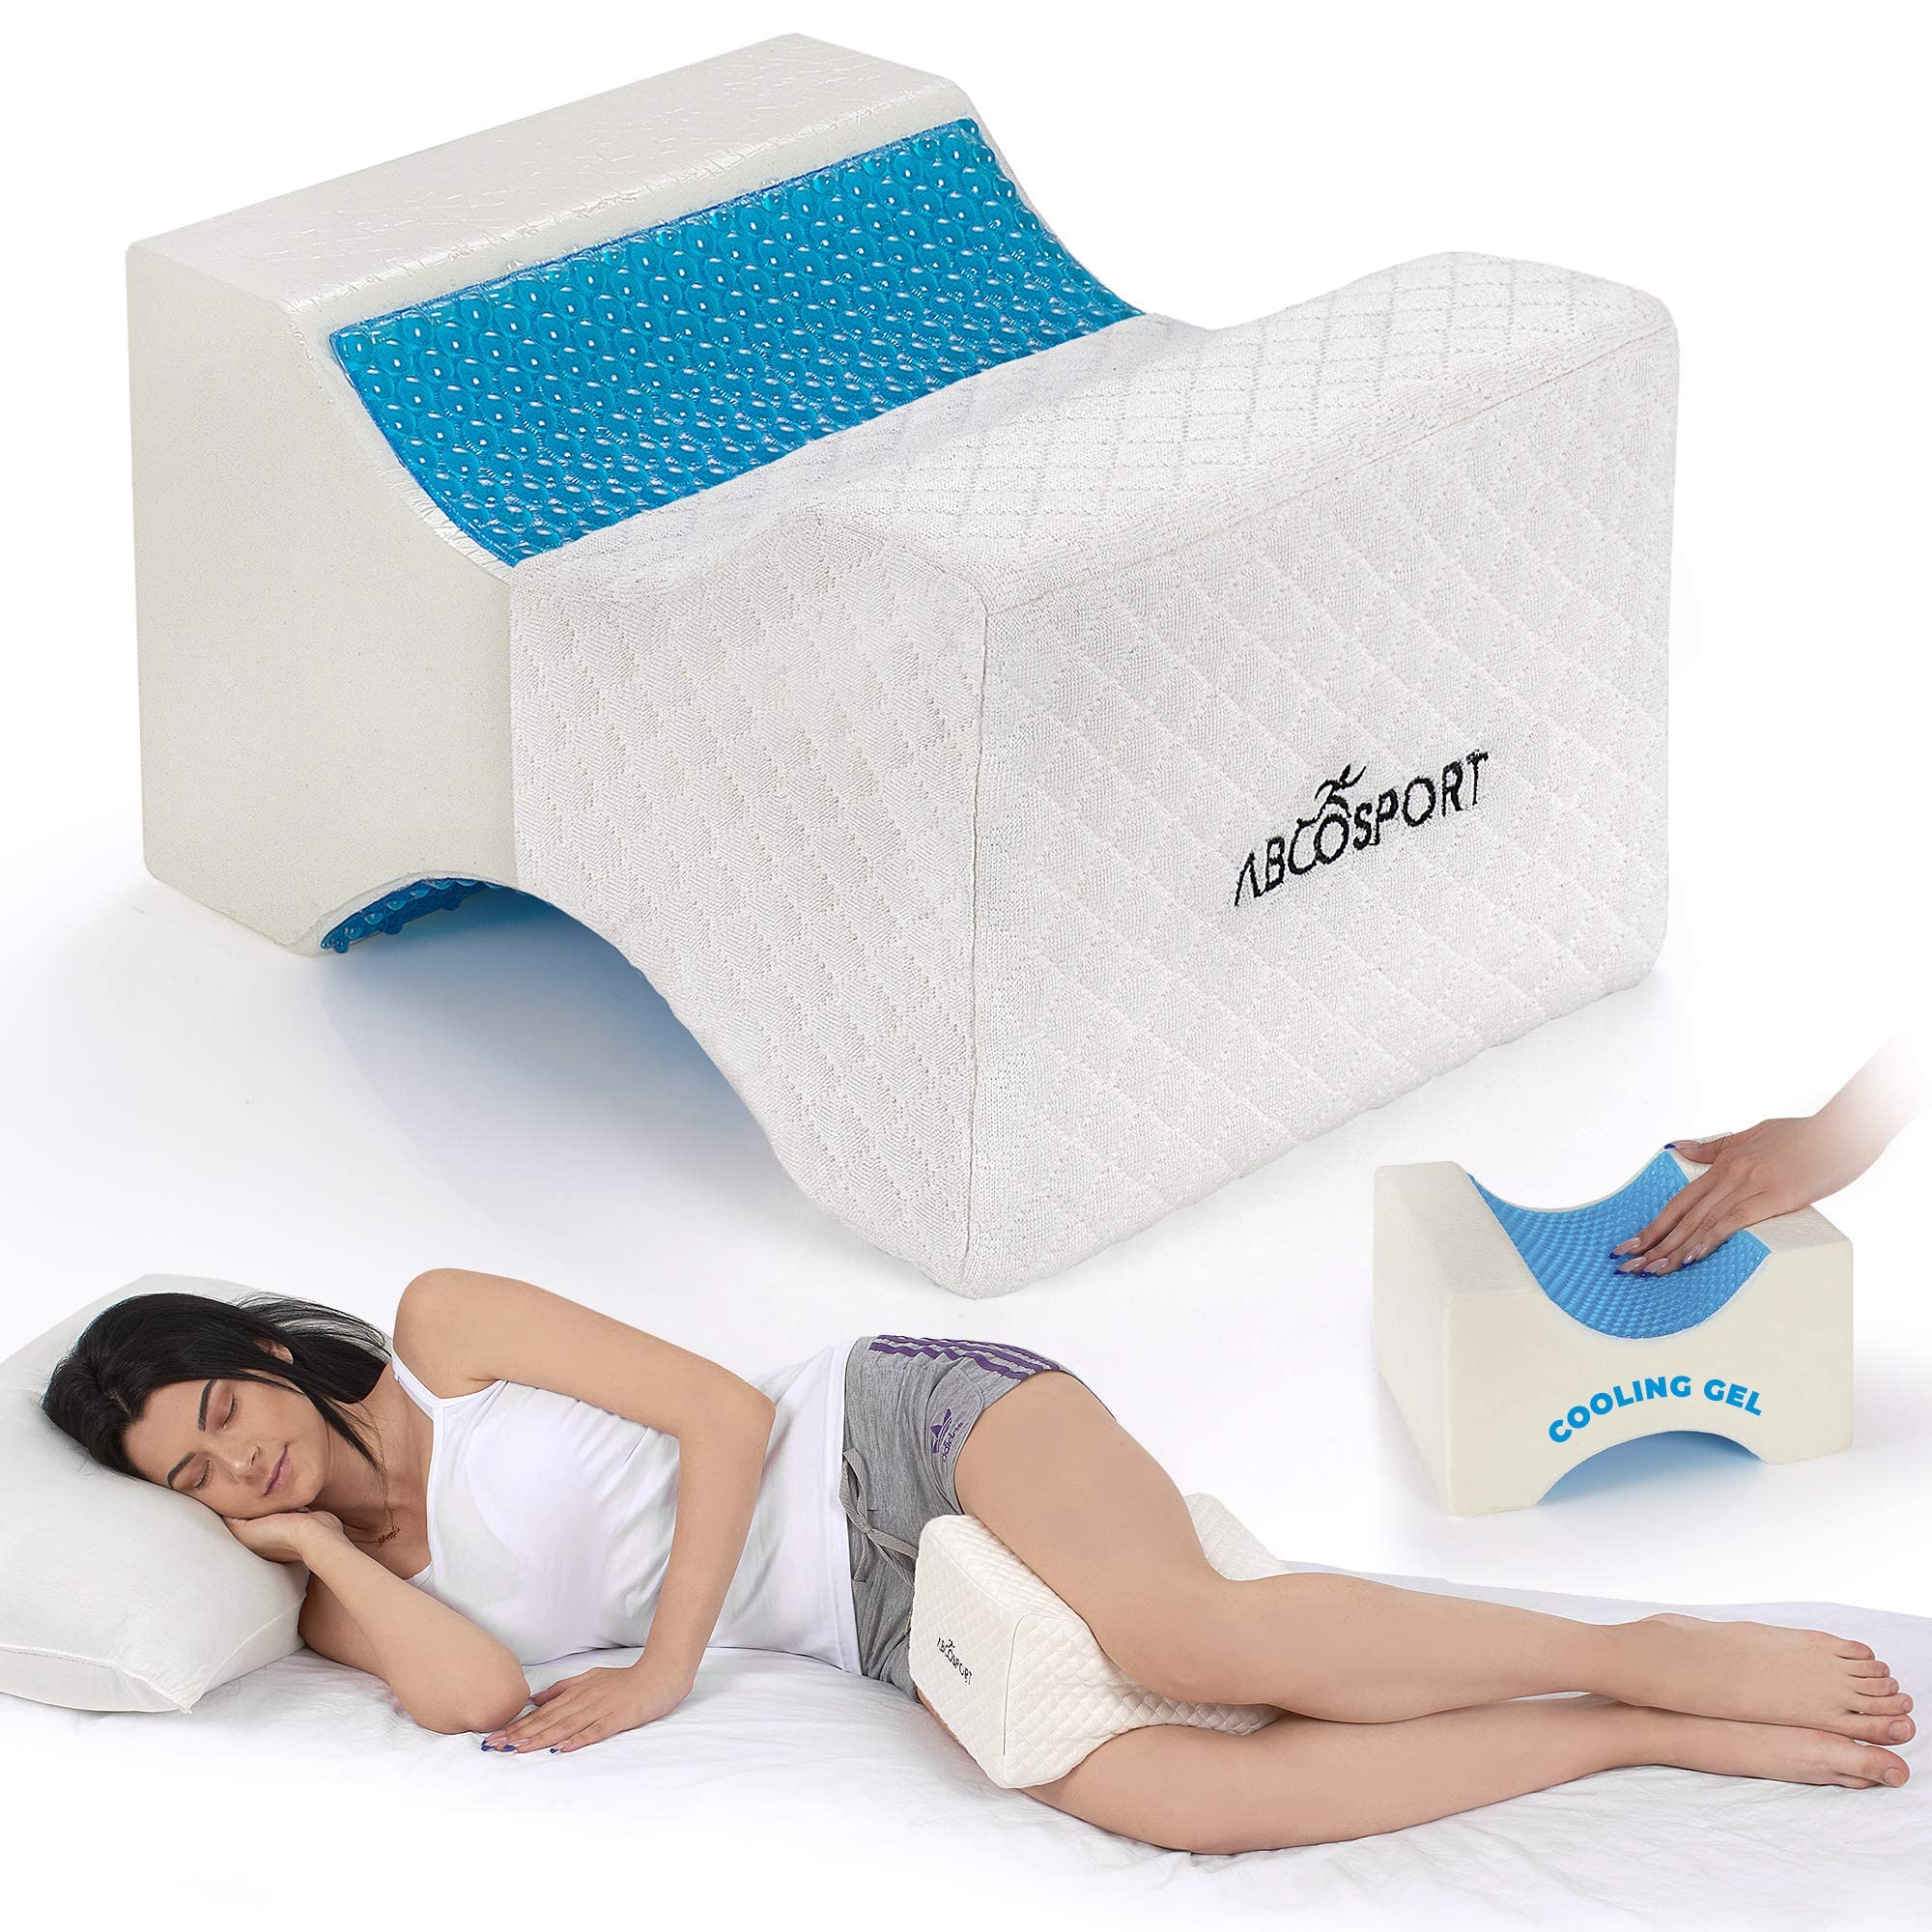 Abco Tech Memory Foam Knee Pillow with Cooling Gel - Knee Wedge Pillow, Leg Pillow for Side Sleepers, Pregnancy, Spine Alignment, Pain Relief - Pillow for Between Knees While Sleeping + Washable Cover  - Good